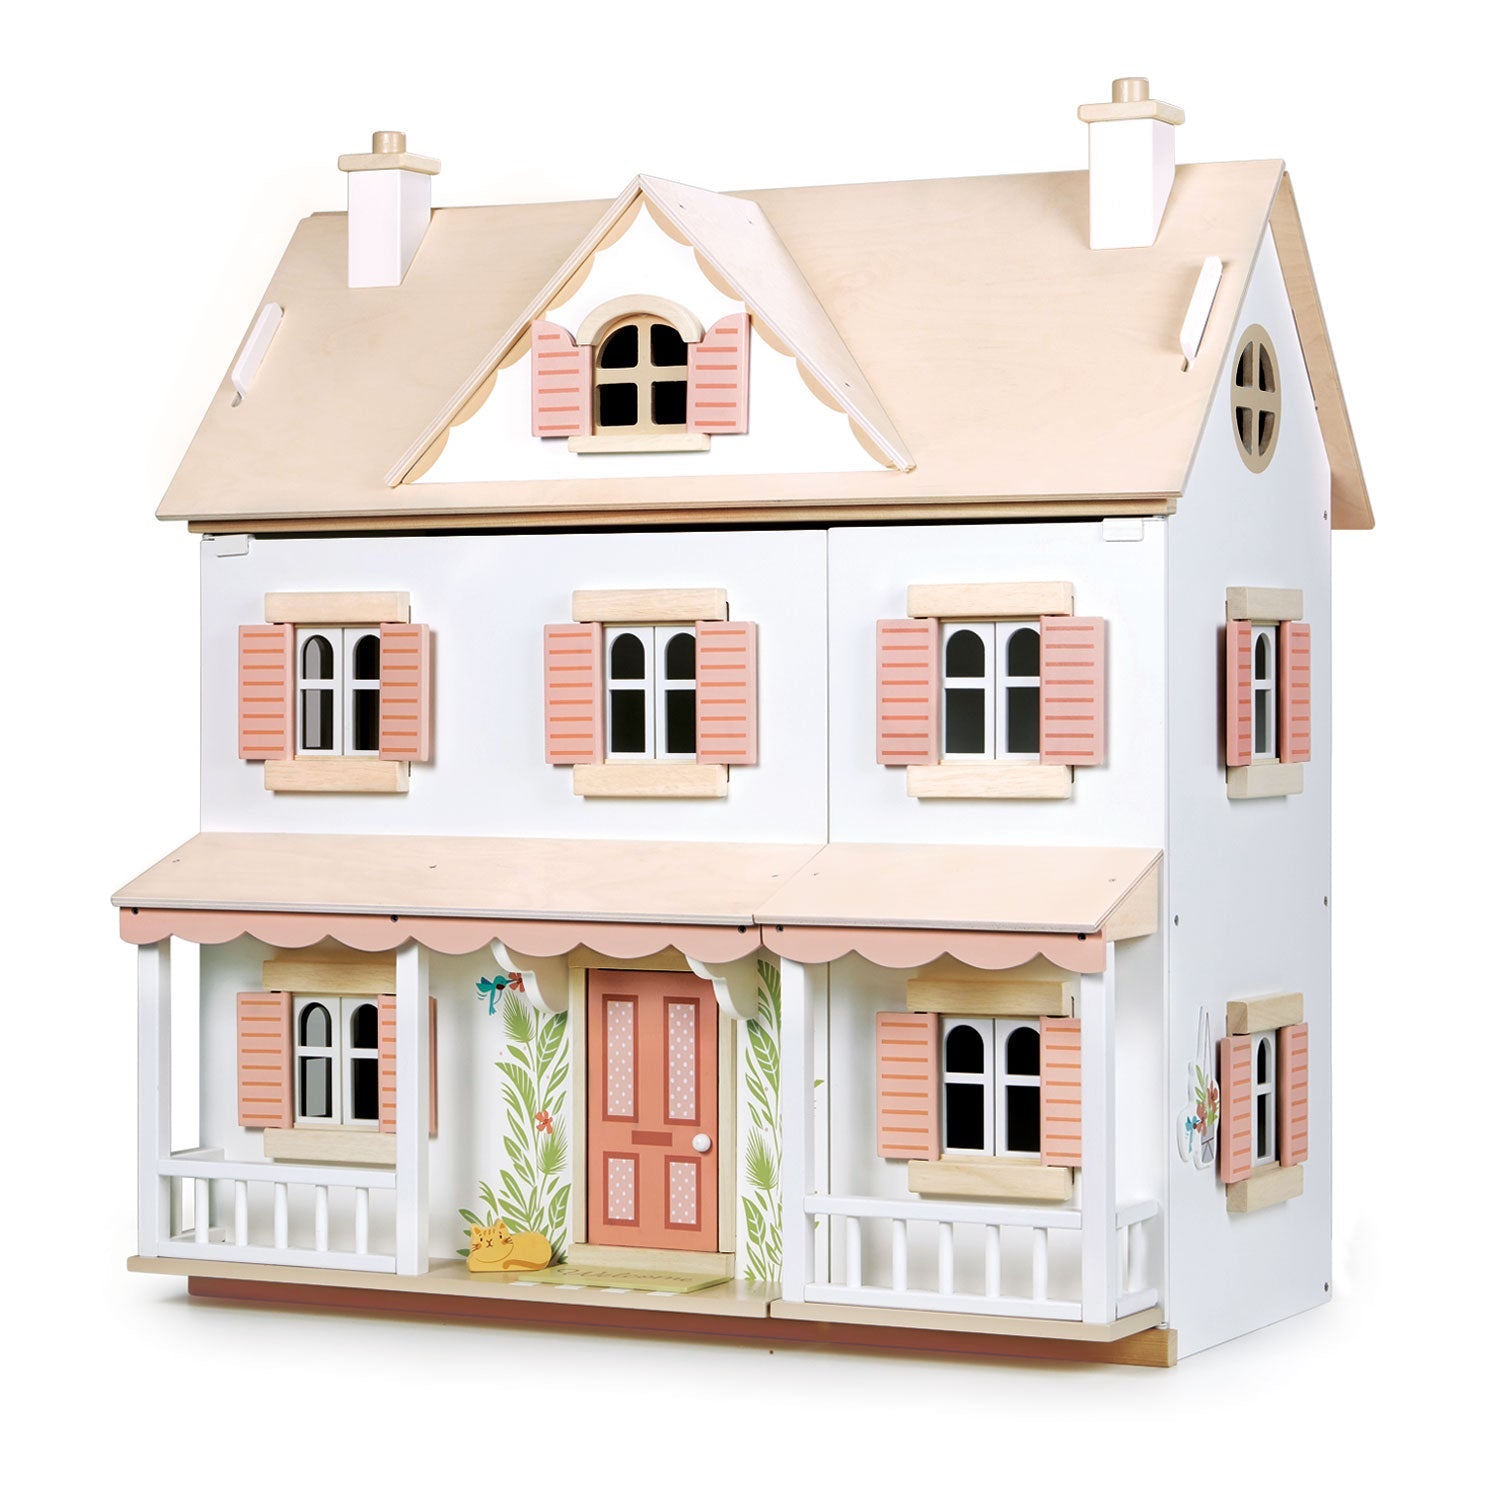 Tender Leaf Toys Hummingbird House Doll's House - An exotic colonial-style dollhouse with verandas, floral decor, and charming details like opening shutters. Spacious interior with four rooms and attic space for dollhouse furniture sets